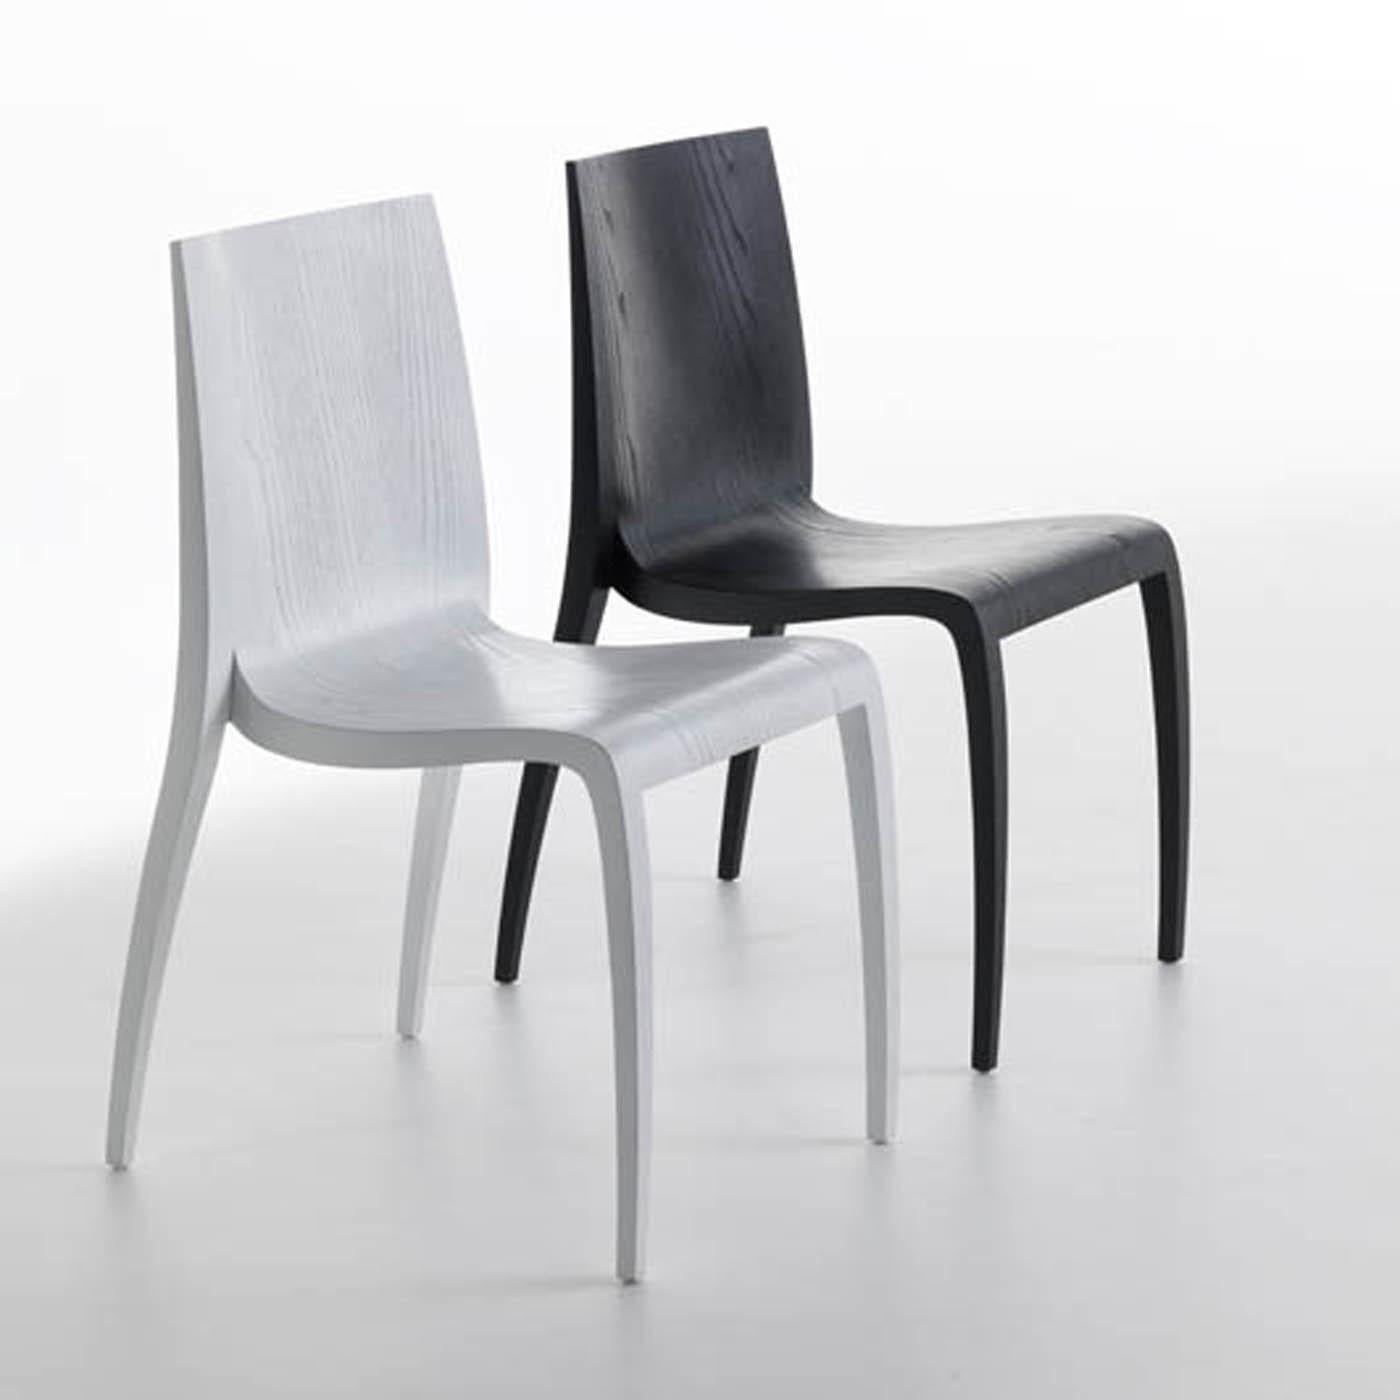 Inspired by the Japanese concept of energy enclosed in the word “ki”, Mario Bellini designed this exquisite contemporary chair boasting an elegant yet simple silhouette. Sinuous and lightweight, the legs are made of ash wood with an open-pore